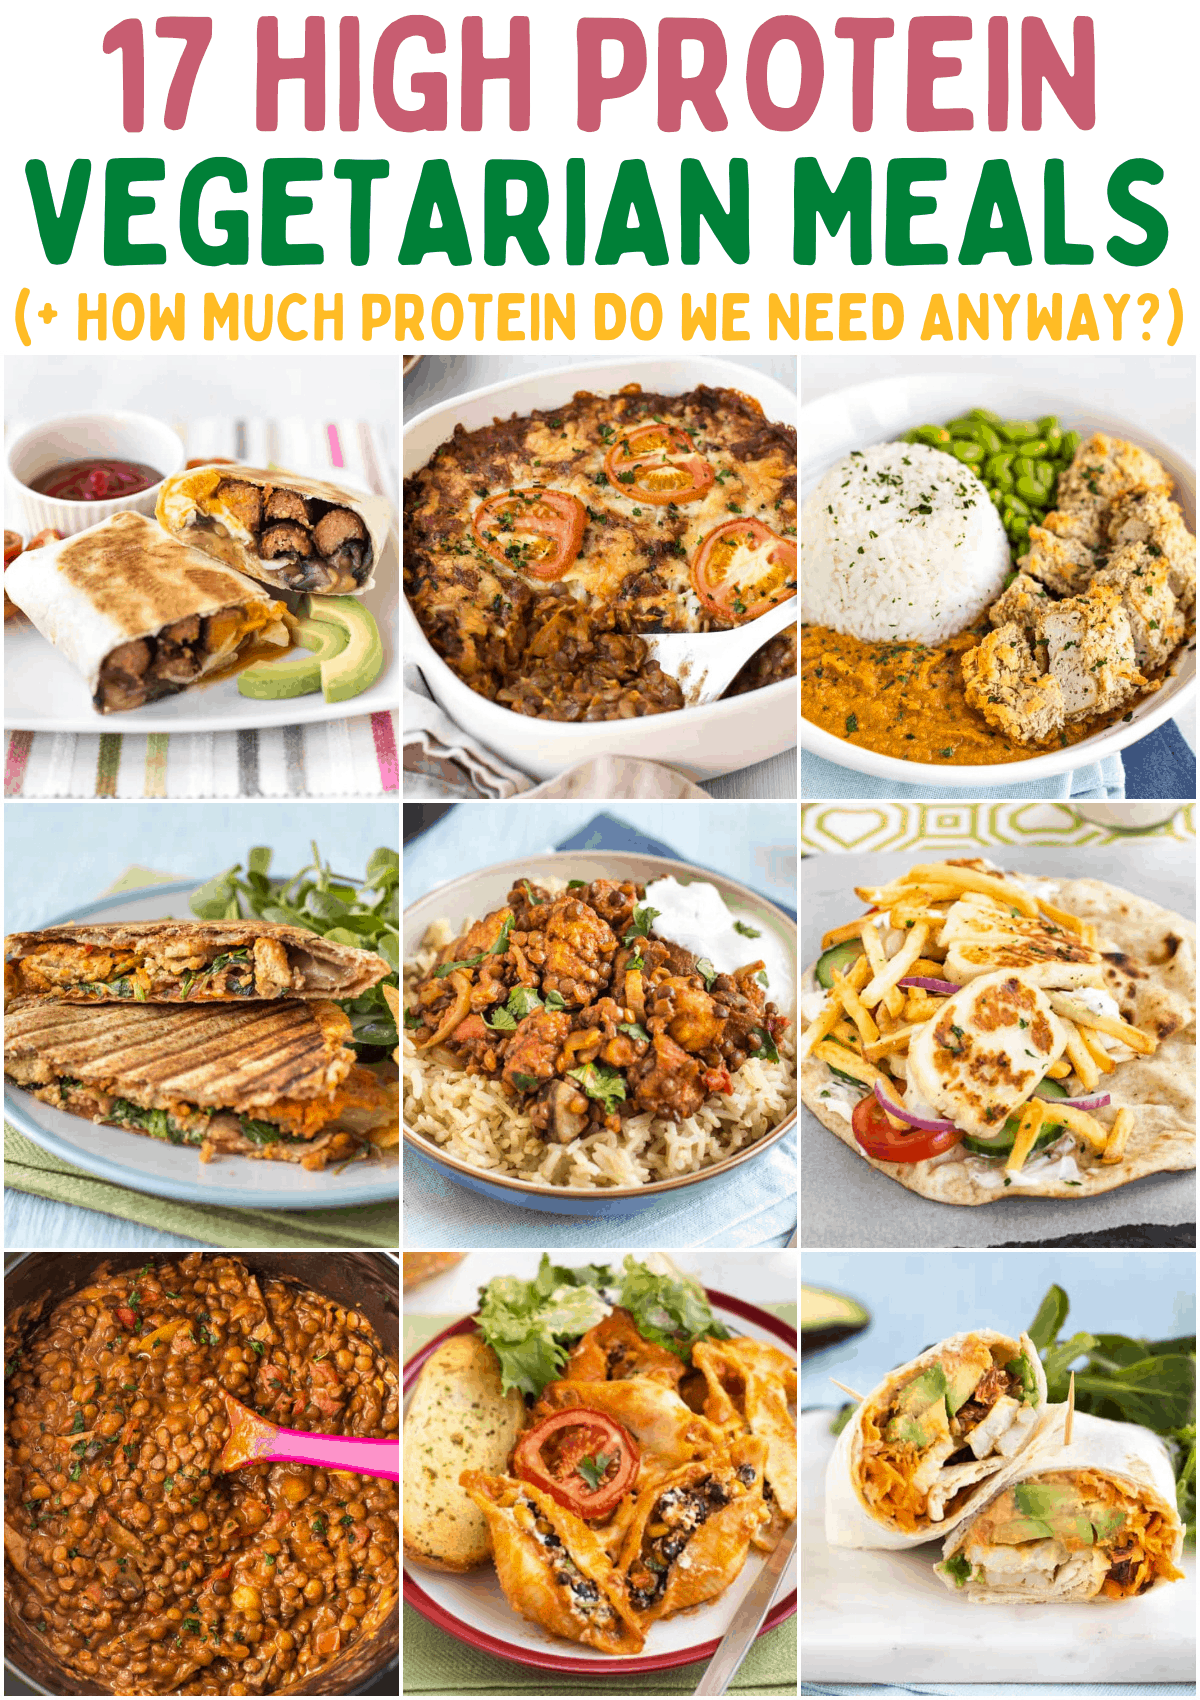 A collage showing various high protein vegetarian meals.